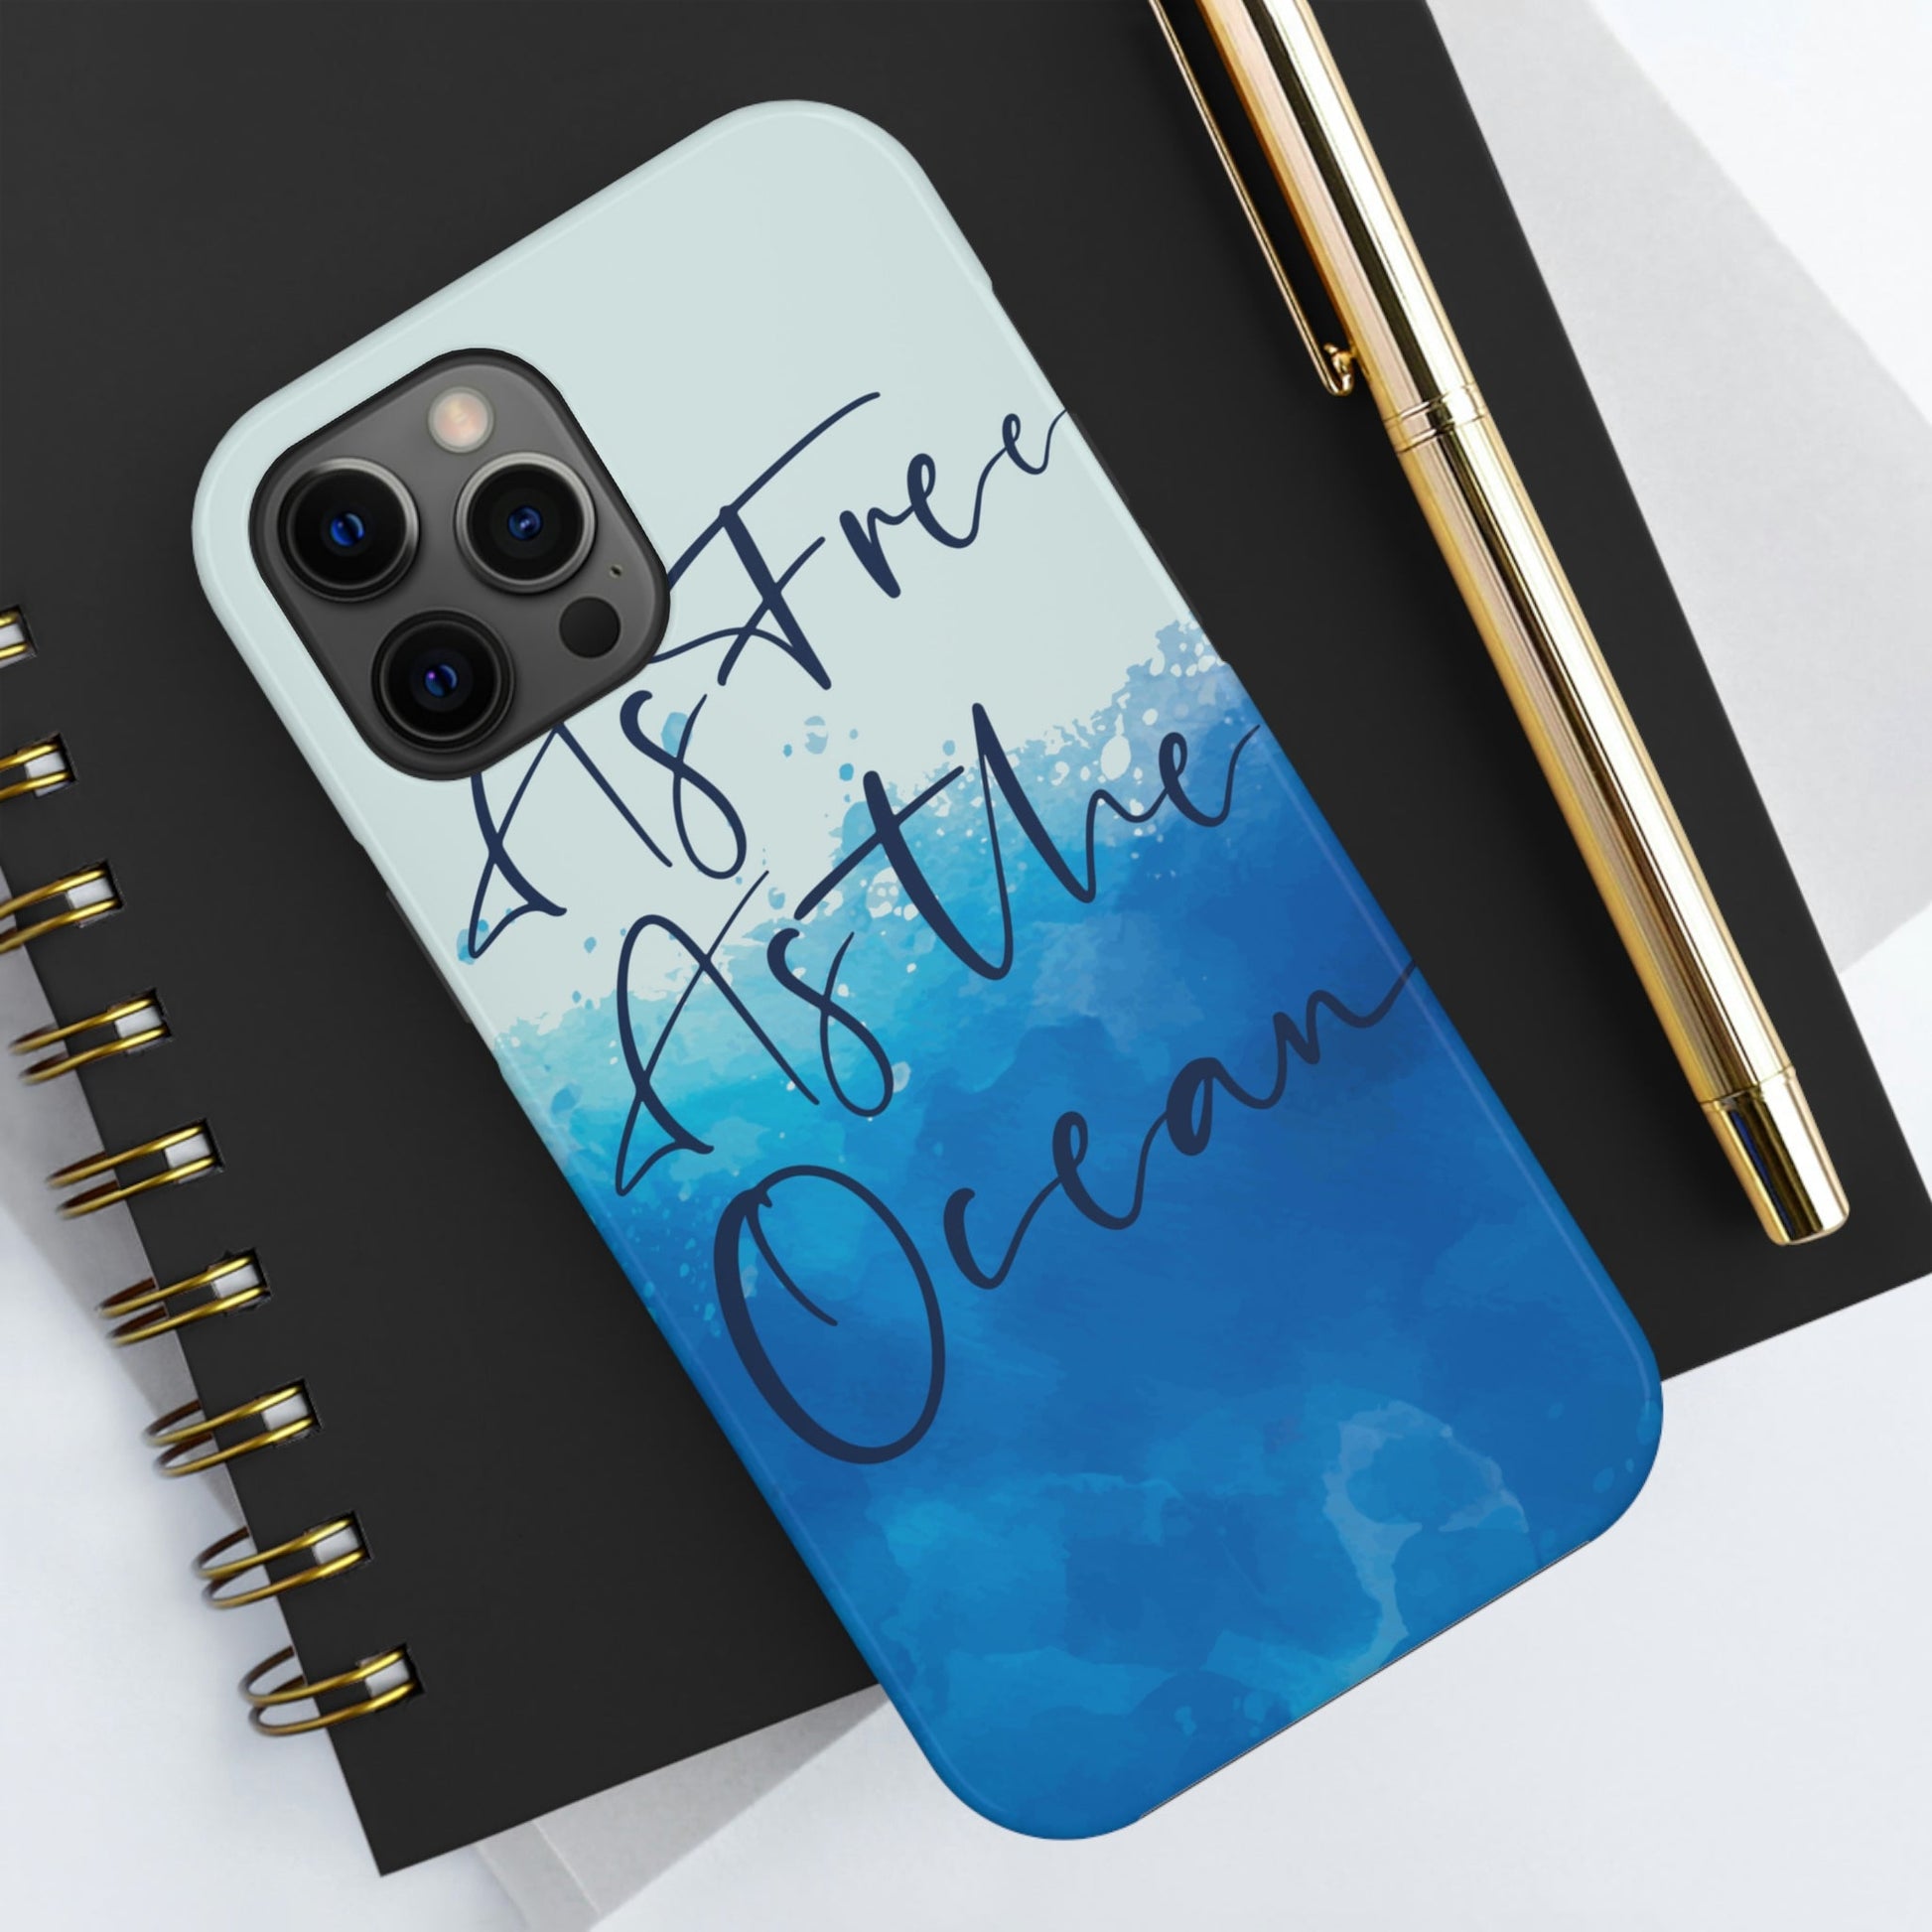 As Free As The Ocean Relationship Quotes Tough Phone Cases Case-Mate Ichaku [Perfect Gifts Selection]